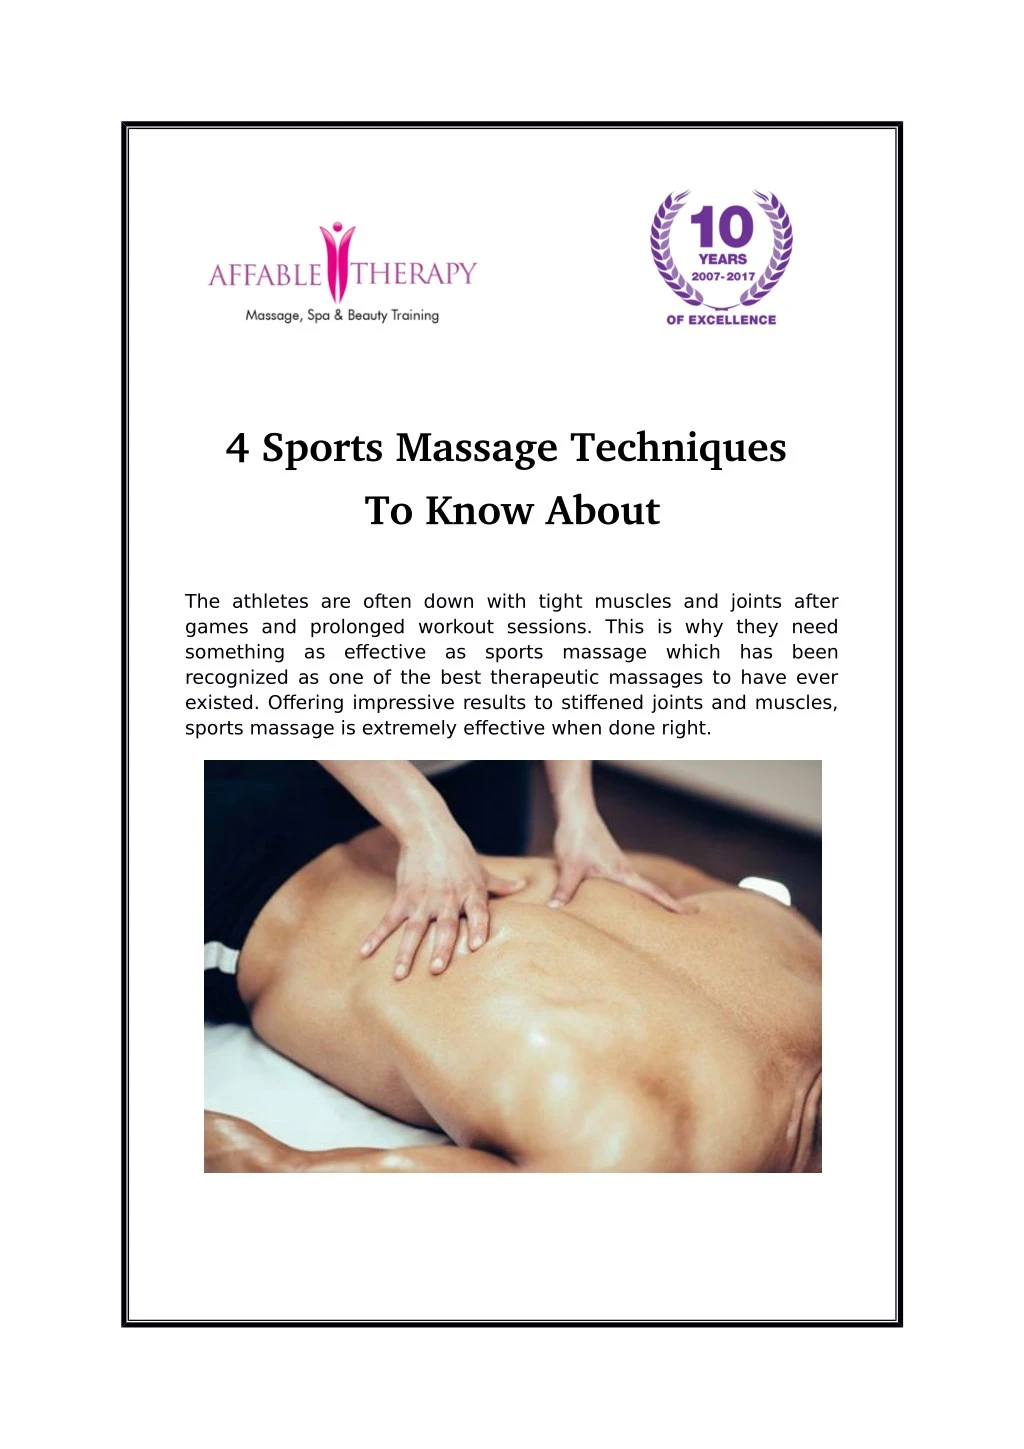 4 sports massage techniques to know about